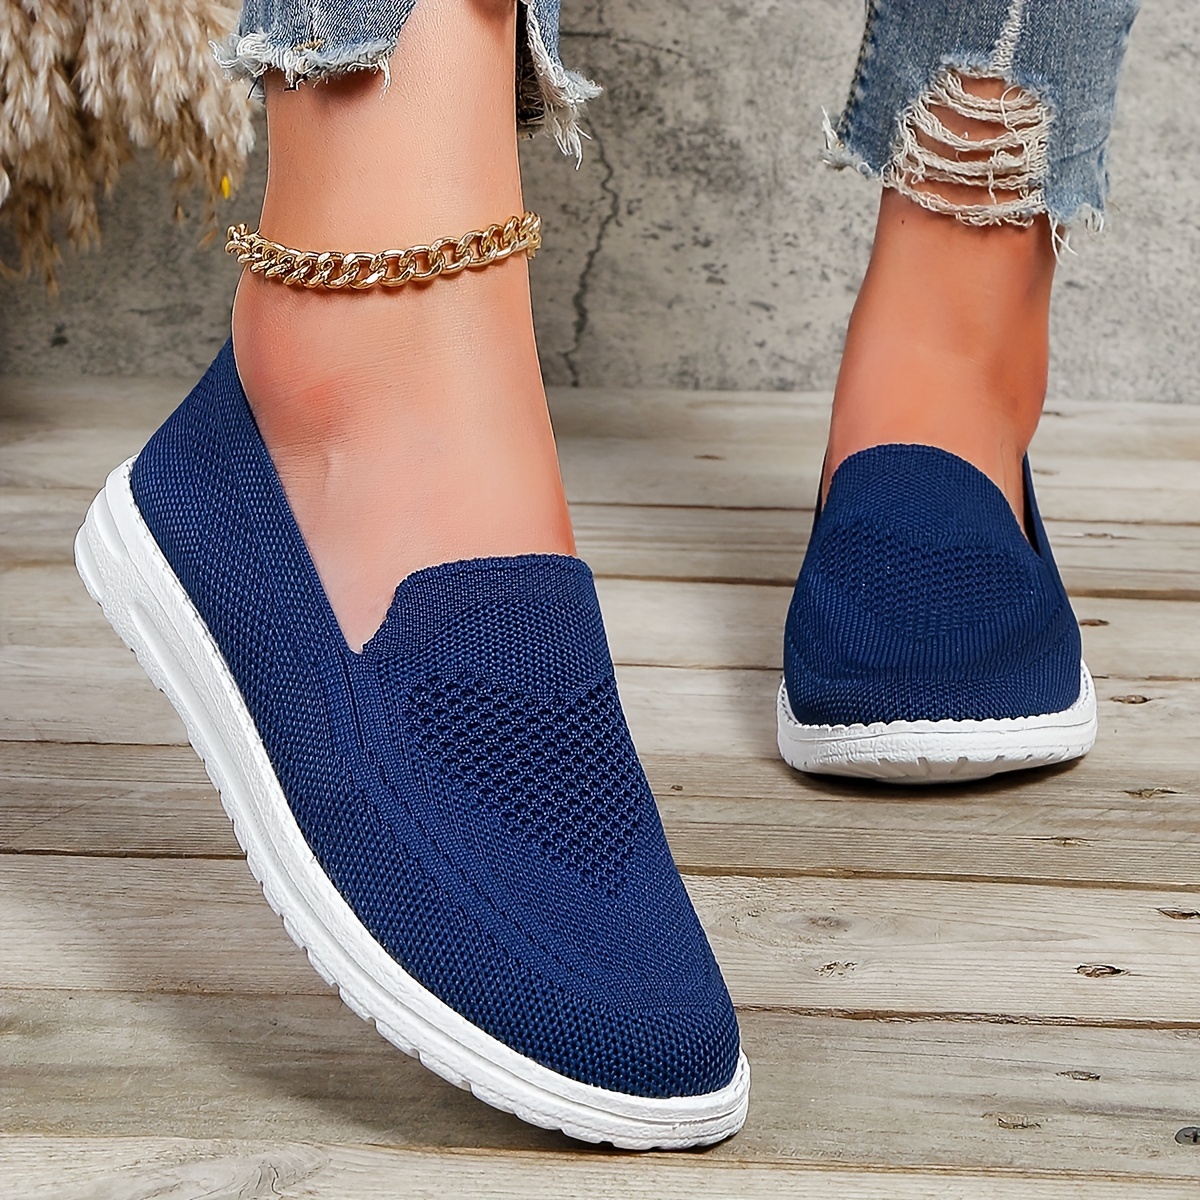 mesh sneakers women s breathable casual slip outdoor shoes